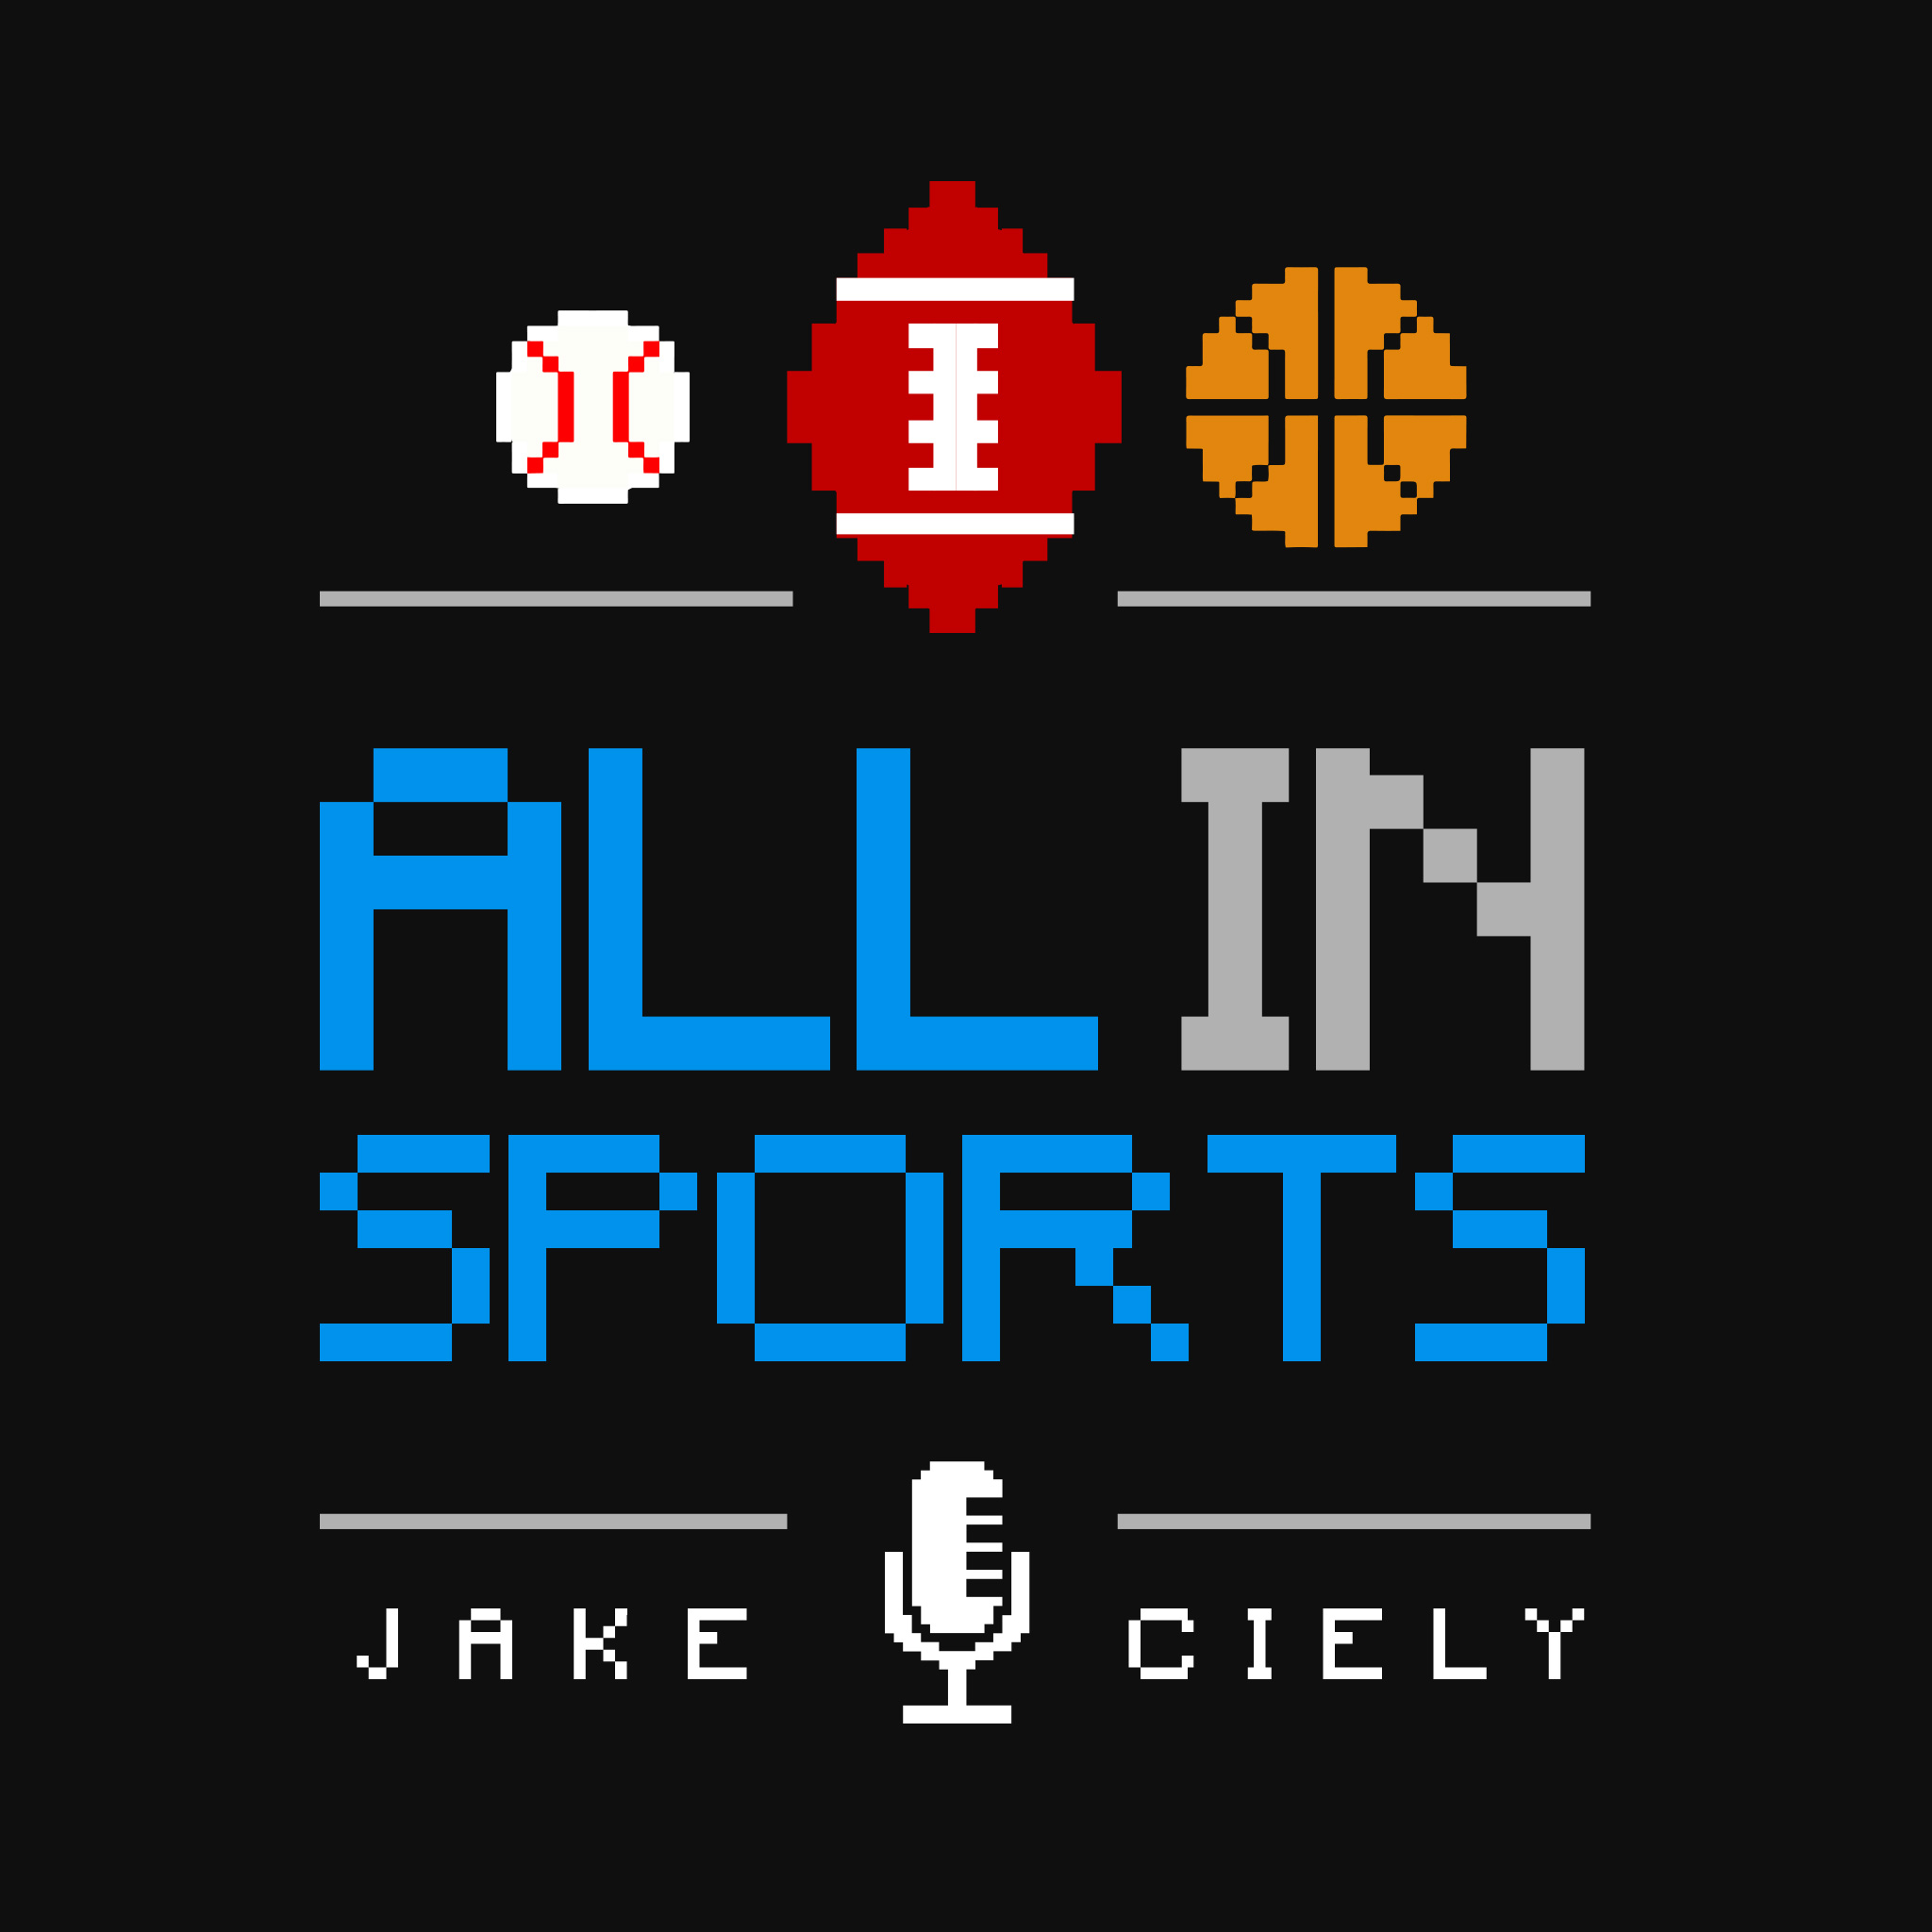 ALL IN SPORTS - JAKE CIELY